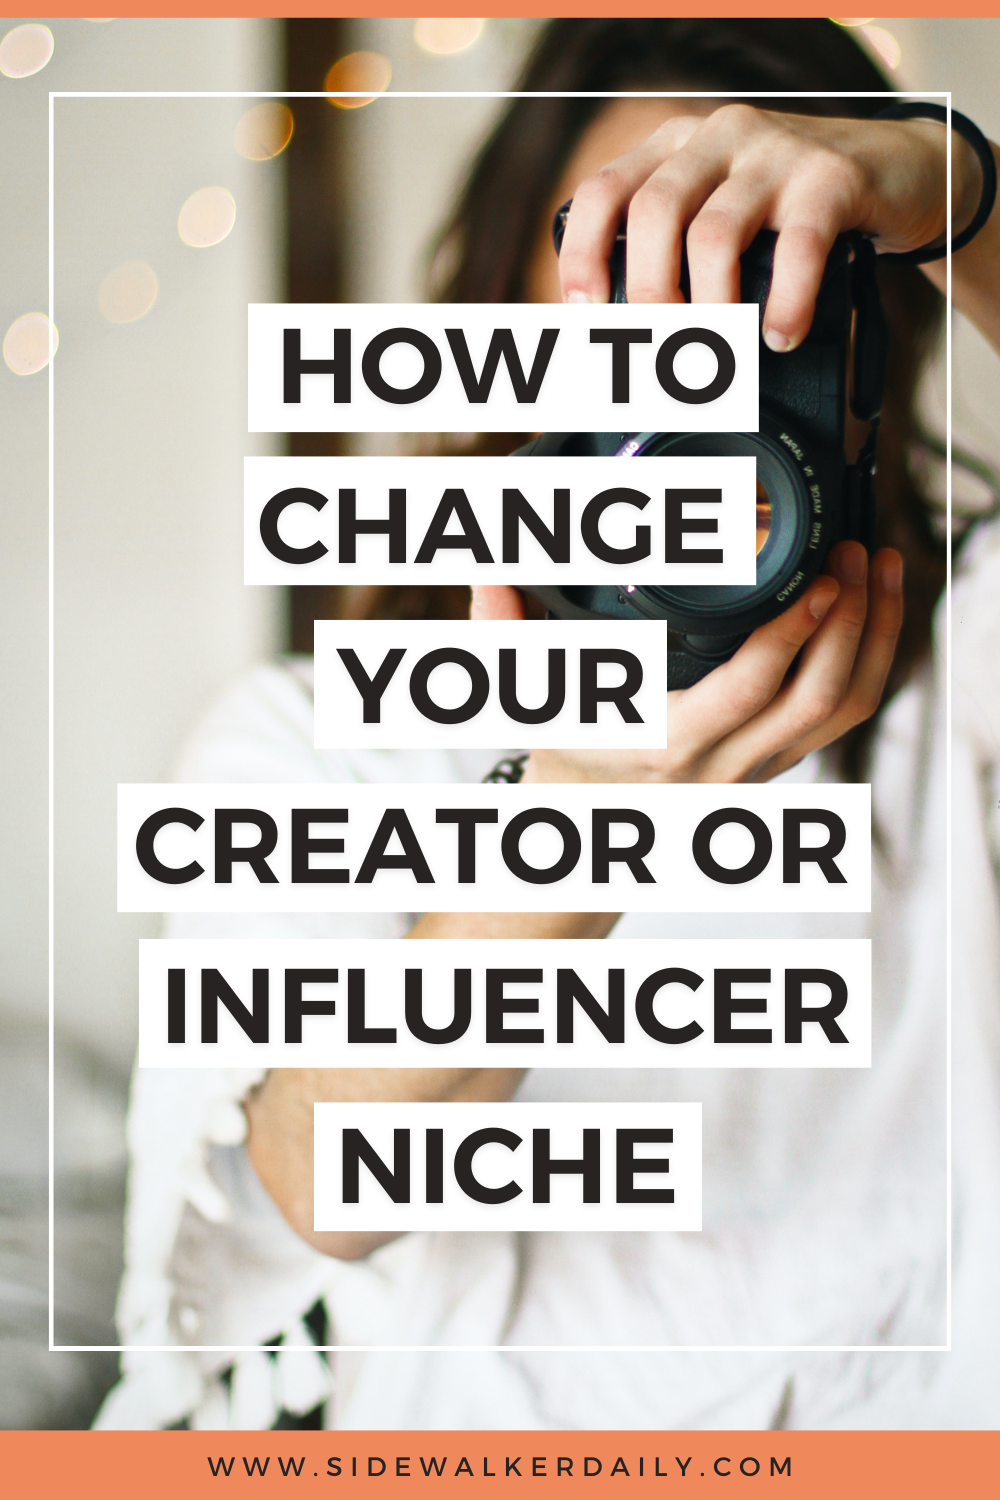 how to change your creator niche